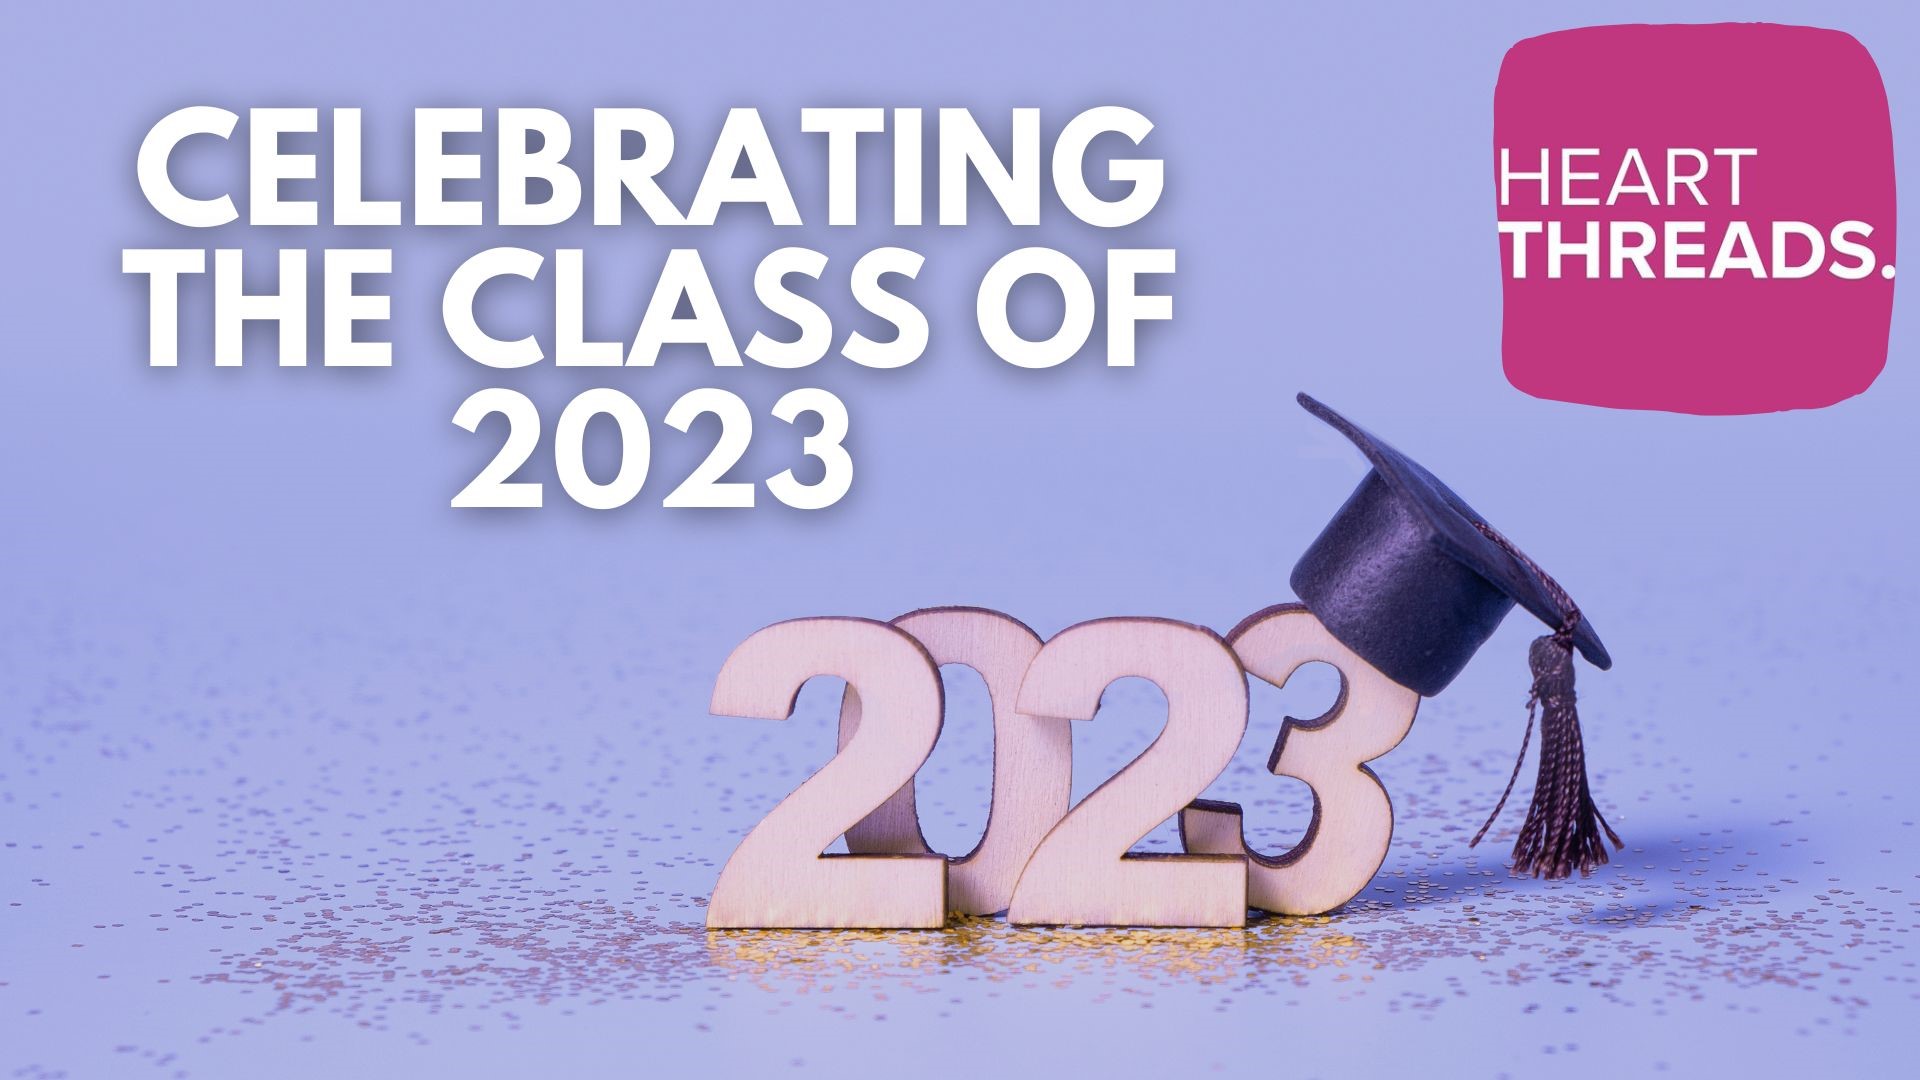 Heartwarming and inspiring stories of the graduates and their goals from the Class of 2023.